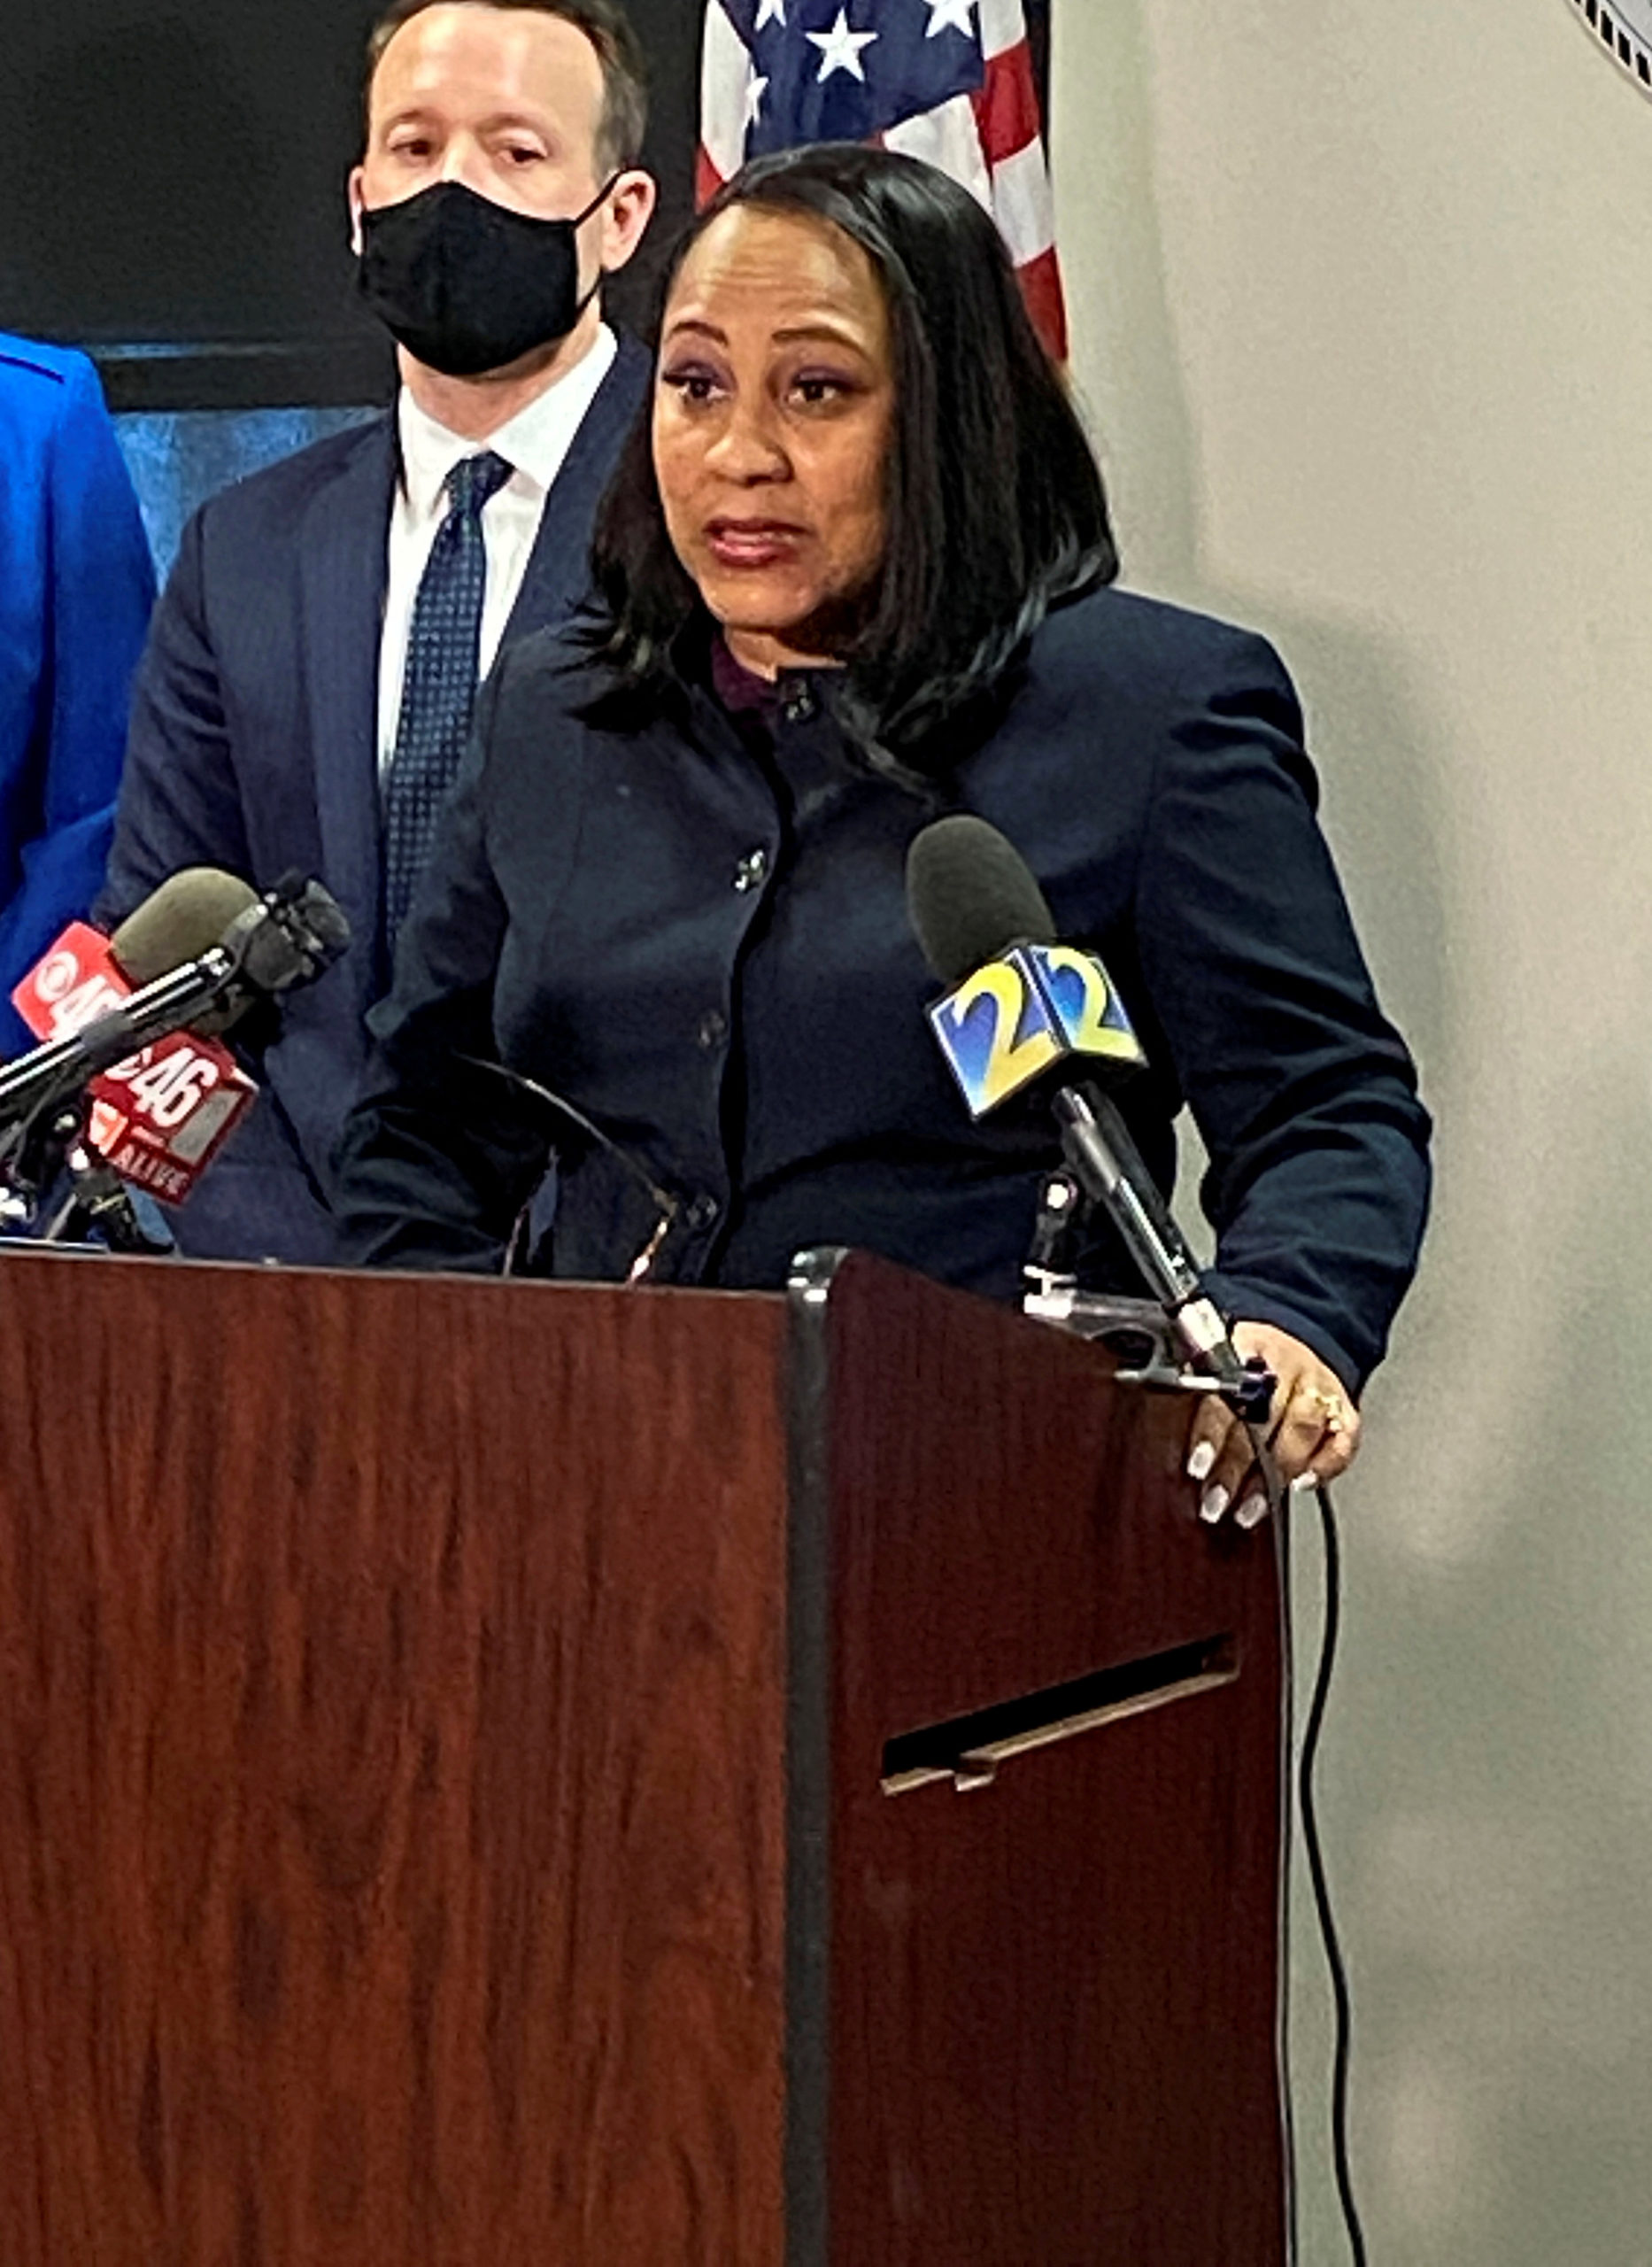 FILE PHOTO: Fulton County District Attorney Fani Willis speaks at a news conference in Atlanta, Georgia, U.S., May 11, 2021. Picture taken May 11, 2021. REUTERS/Linda So/File Photo